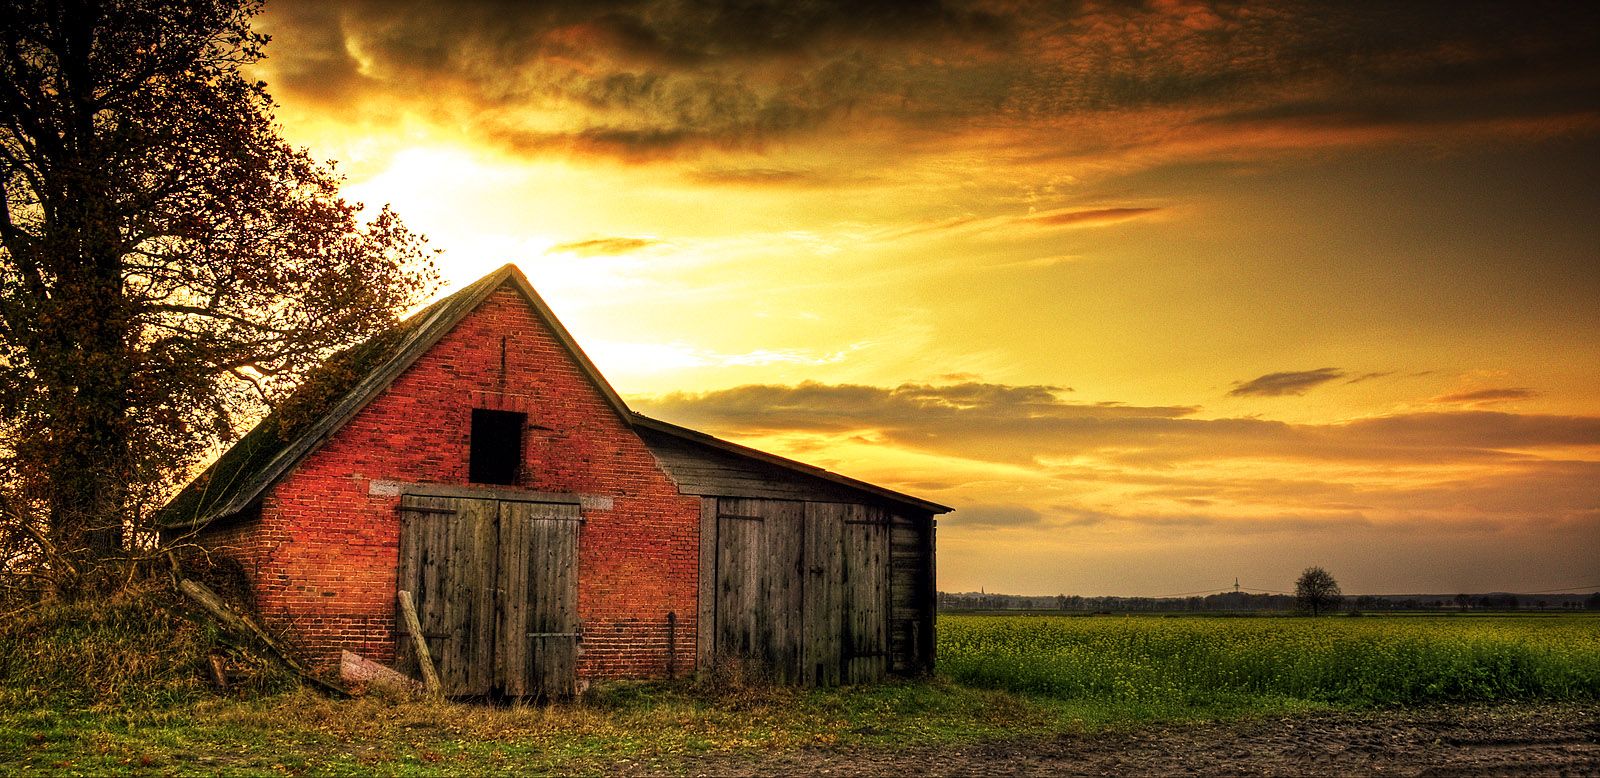 Old Barn Wallpaper. Old Barn Wallpaper, Wallpaper Barn Quilts and Rustic Barn Wallpaper